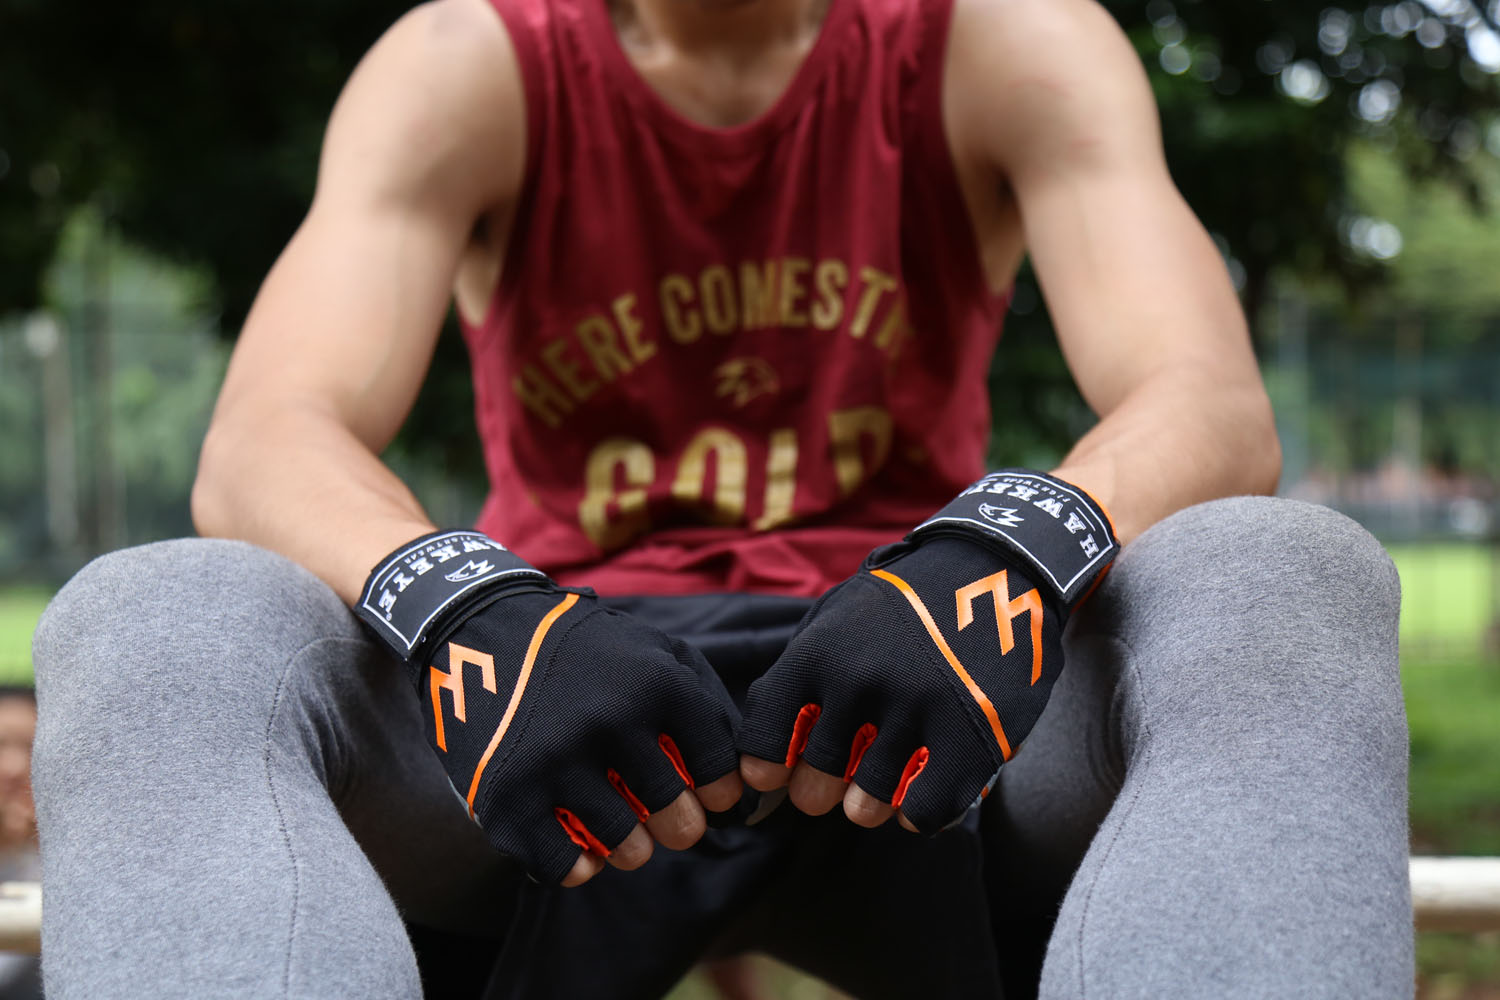 15 Minute Street Workout Gloves for Fat Body